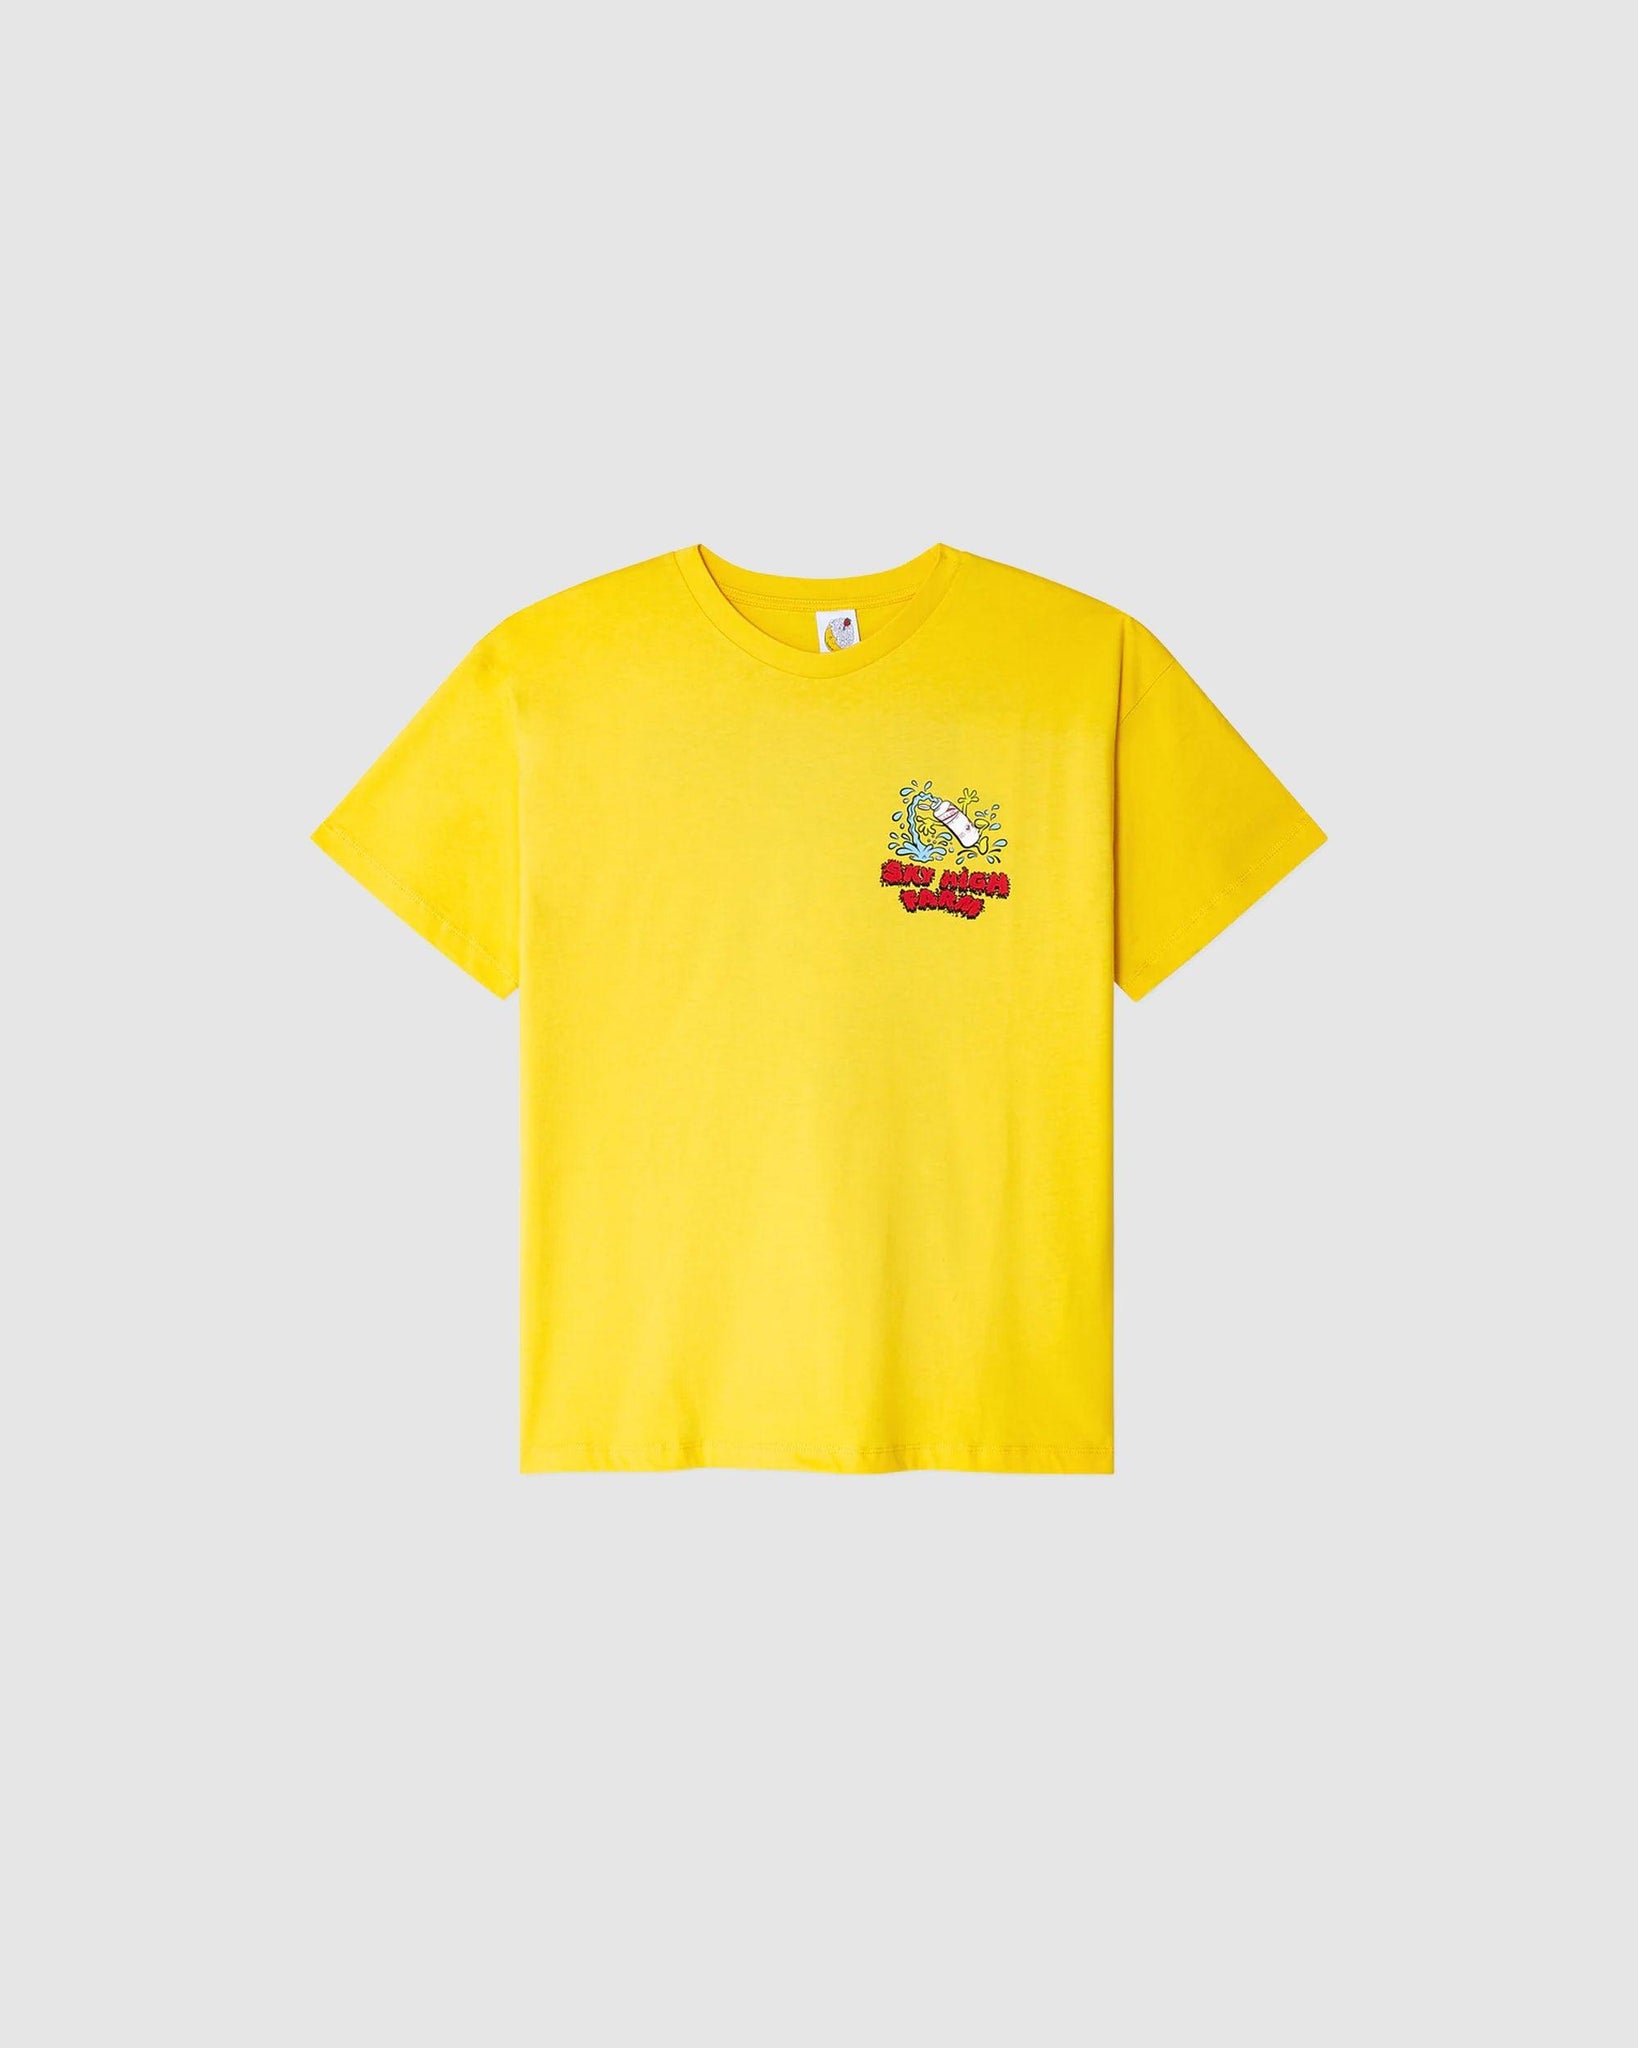 Flatbush Printed T Shirt Yellow - {{ collection.title }} - Chinatown Country Club 